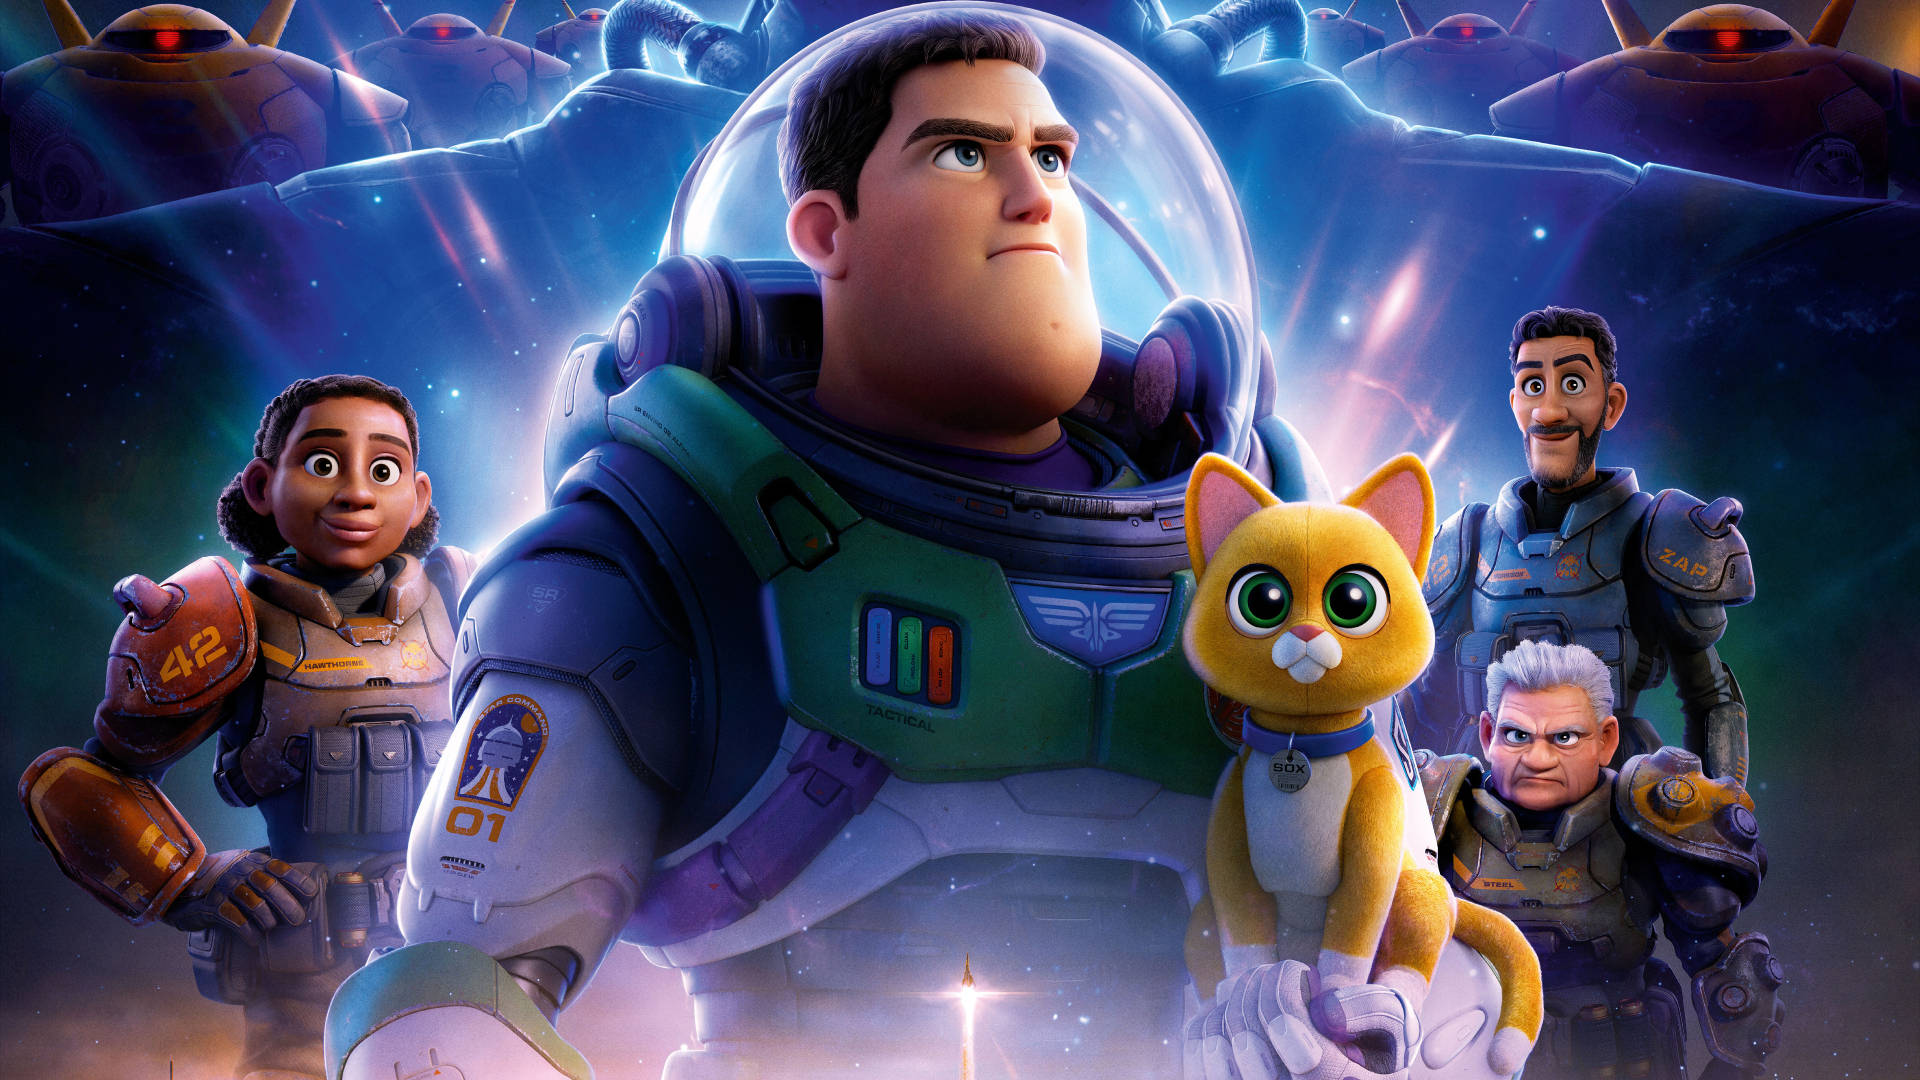 Lightyear And Astronauts Background